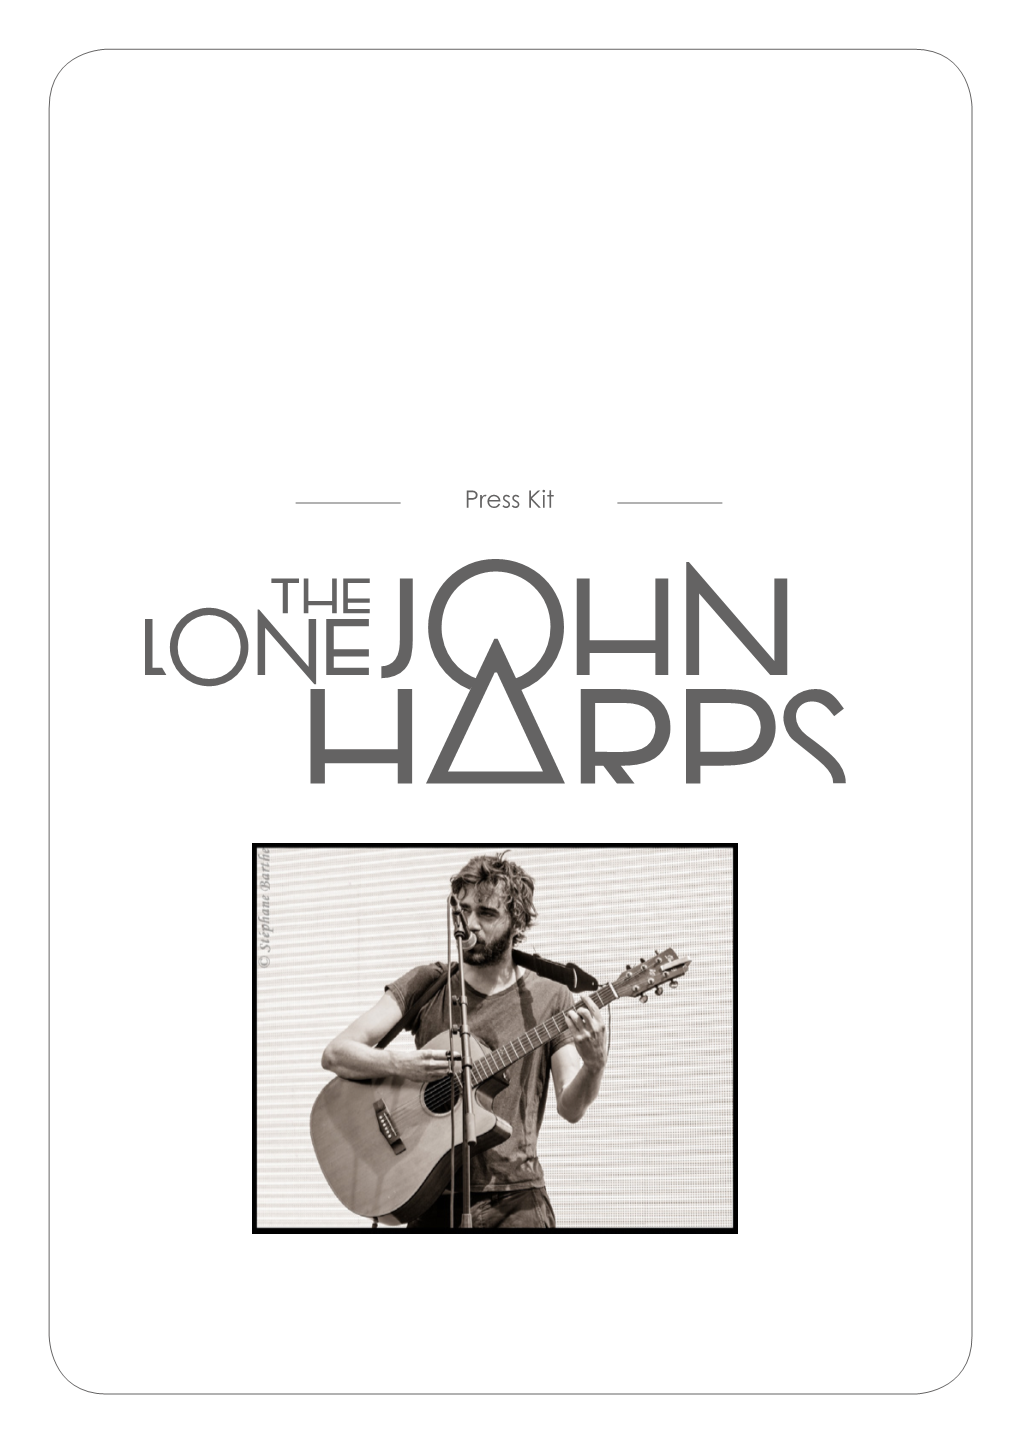 Press Kit the Lone John Harps Draws on Diverse Influences to Explore His Surroundings in the Manner of the Troubadour Singers of Old, but in a 21St Century Context